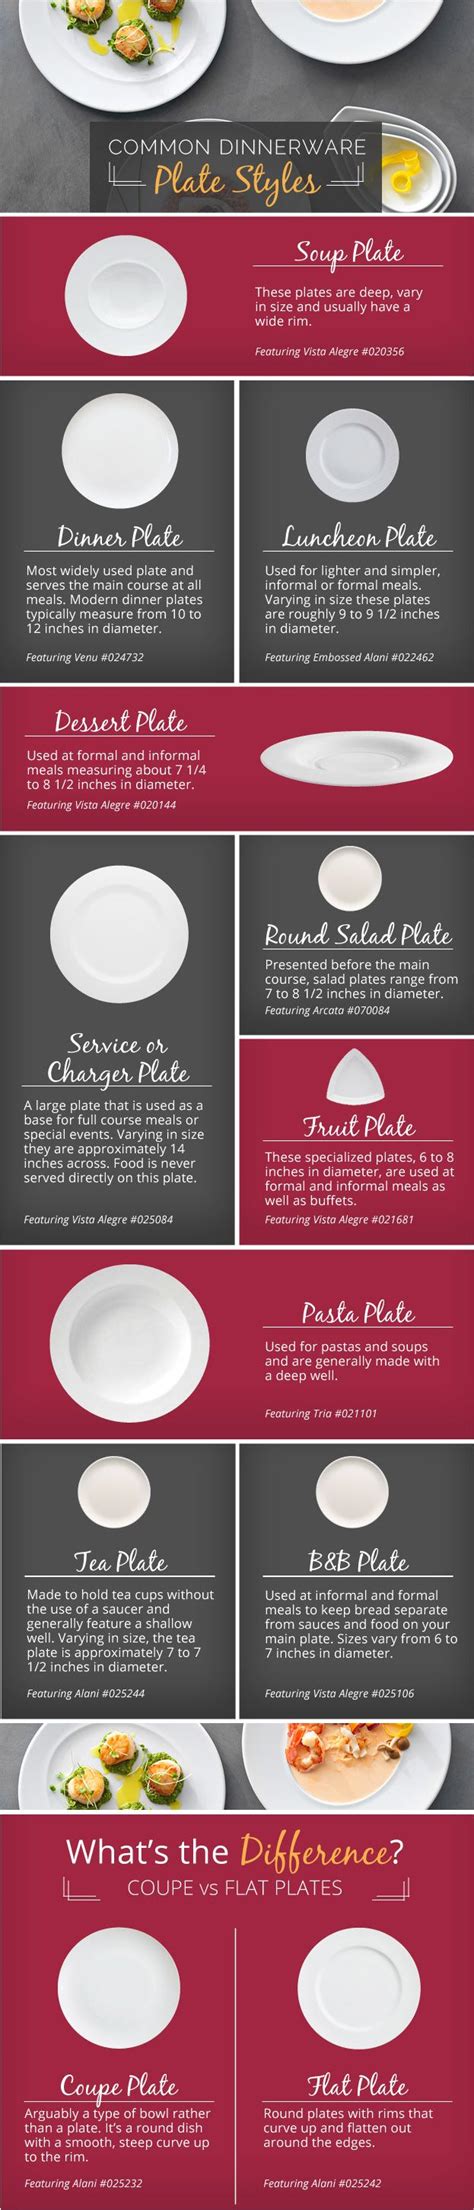 Learn The Difference Between Plate Types And Their Specific Uses With